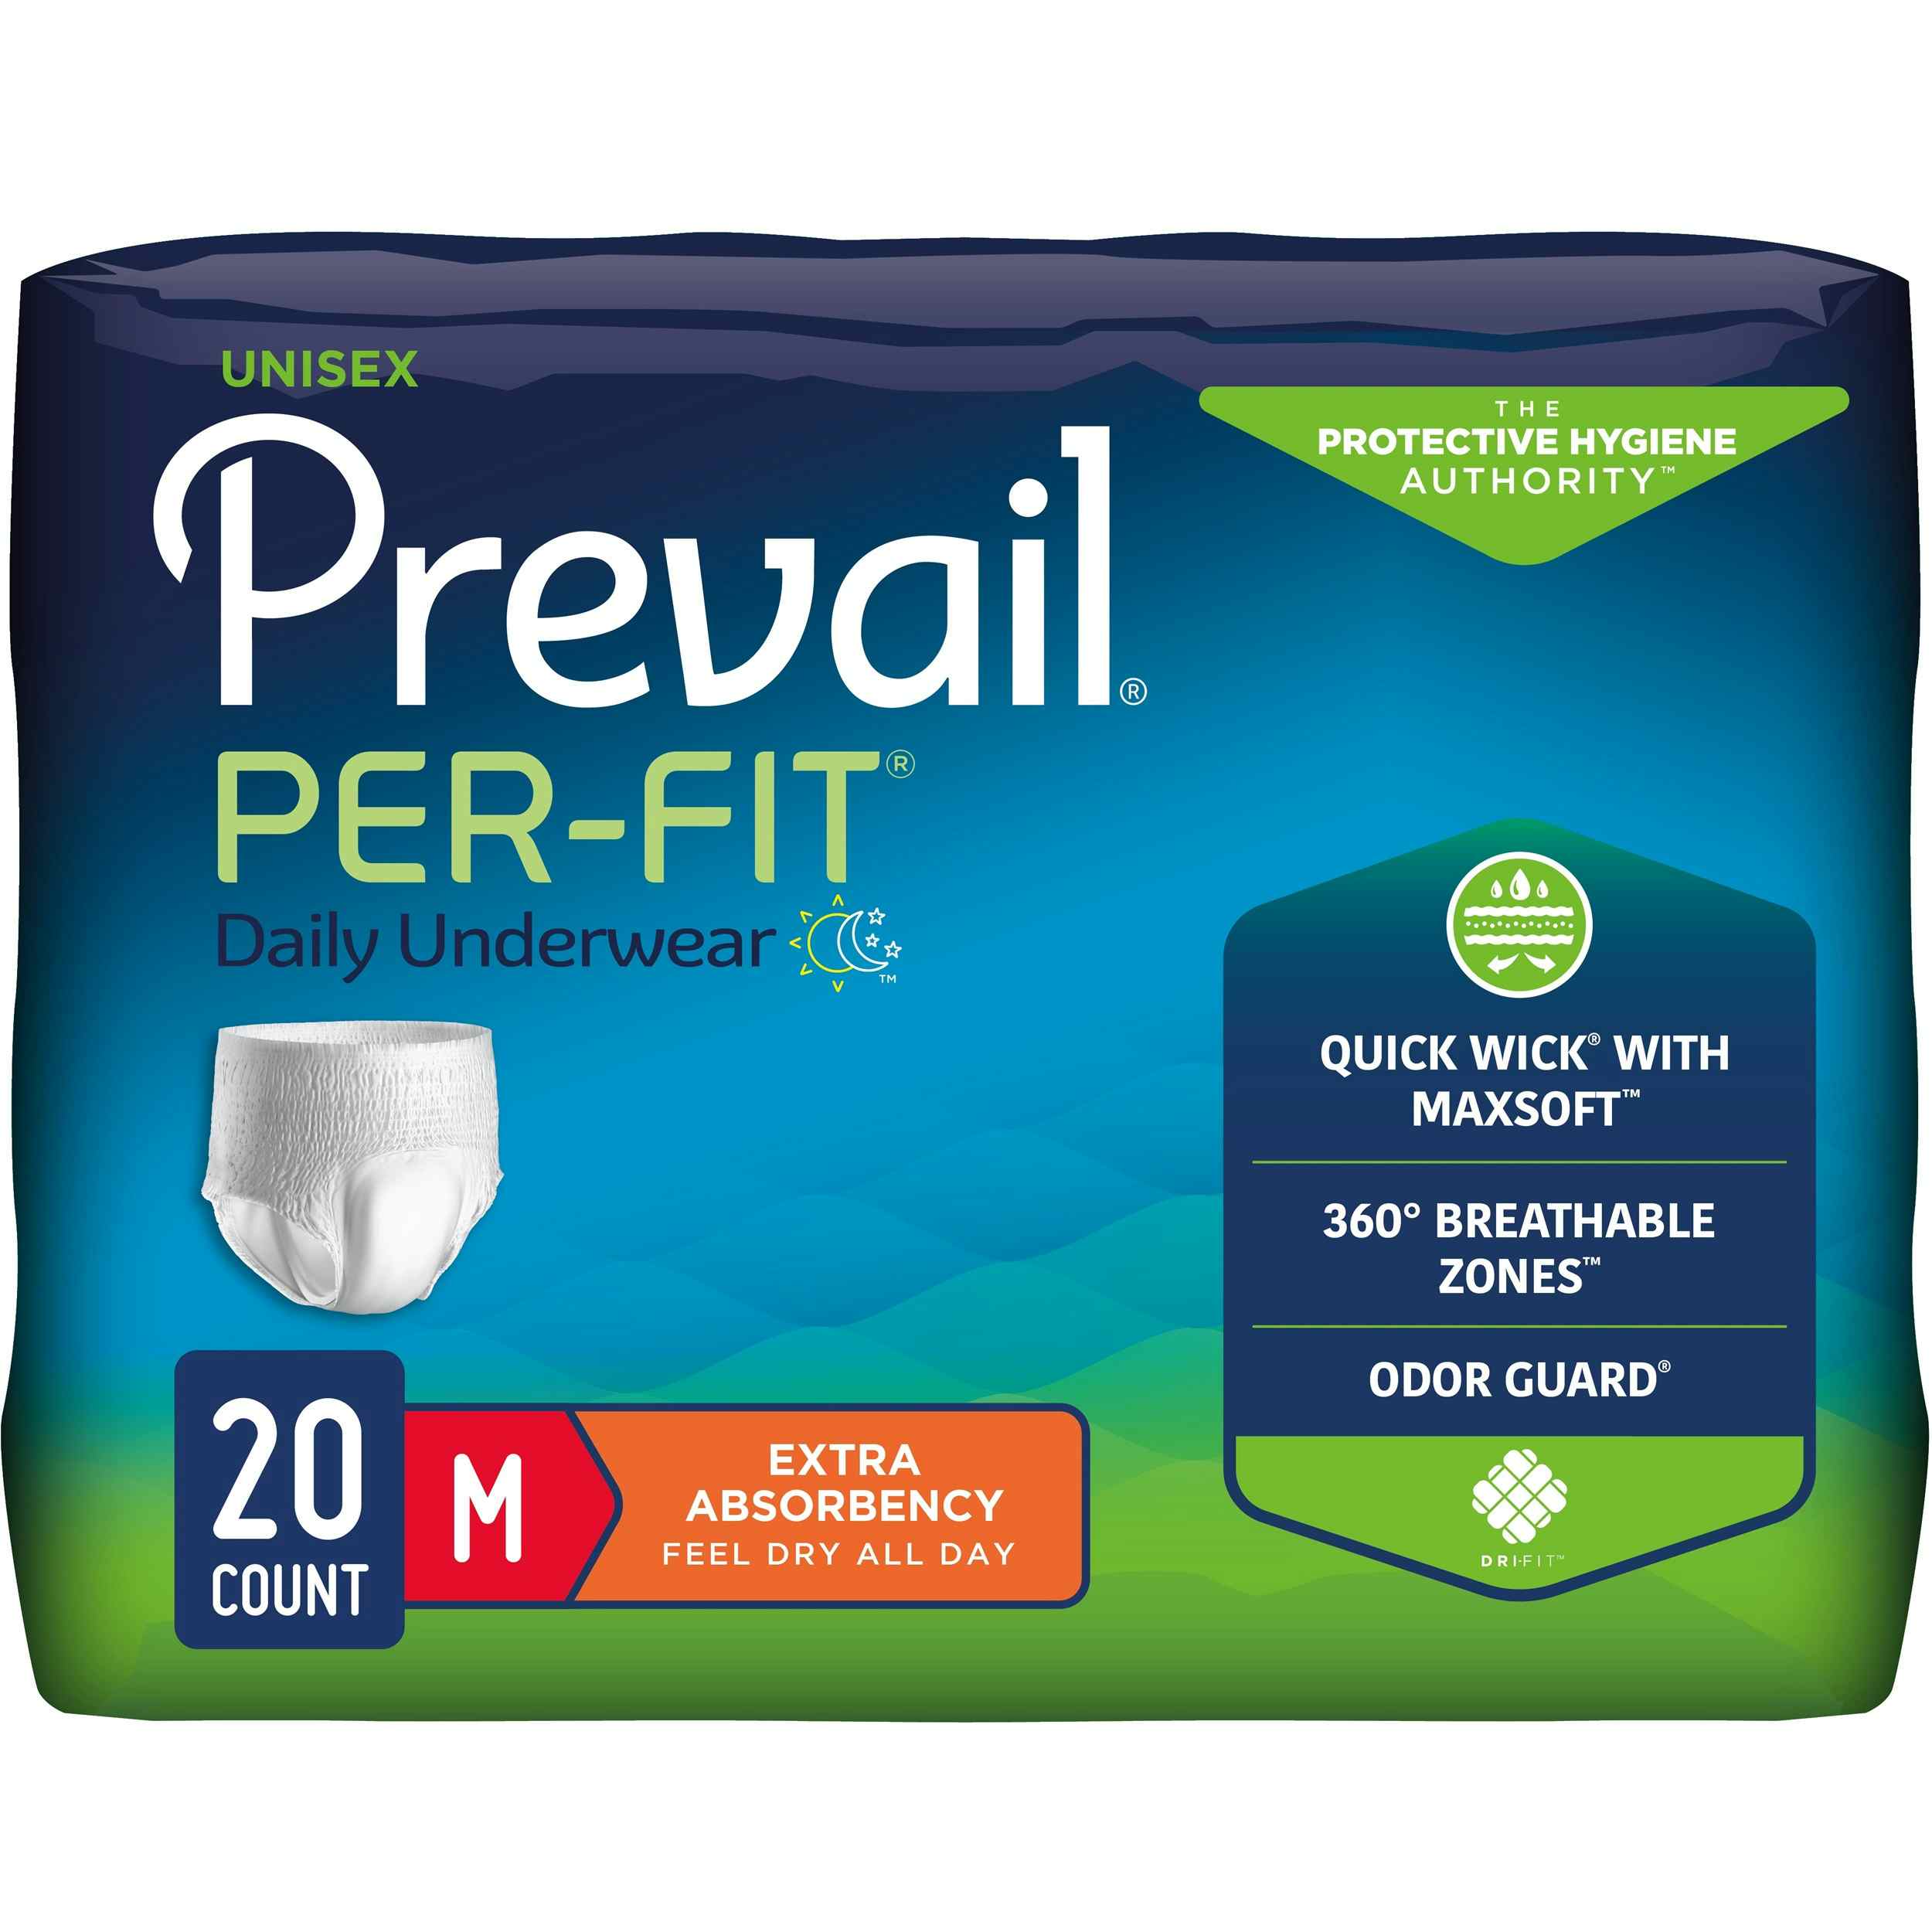 Prevail Per-Fit Incontinence Protective Underwear